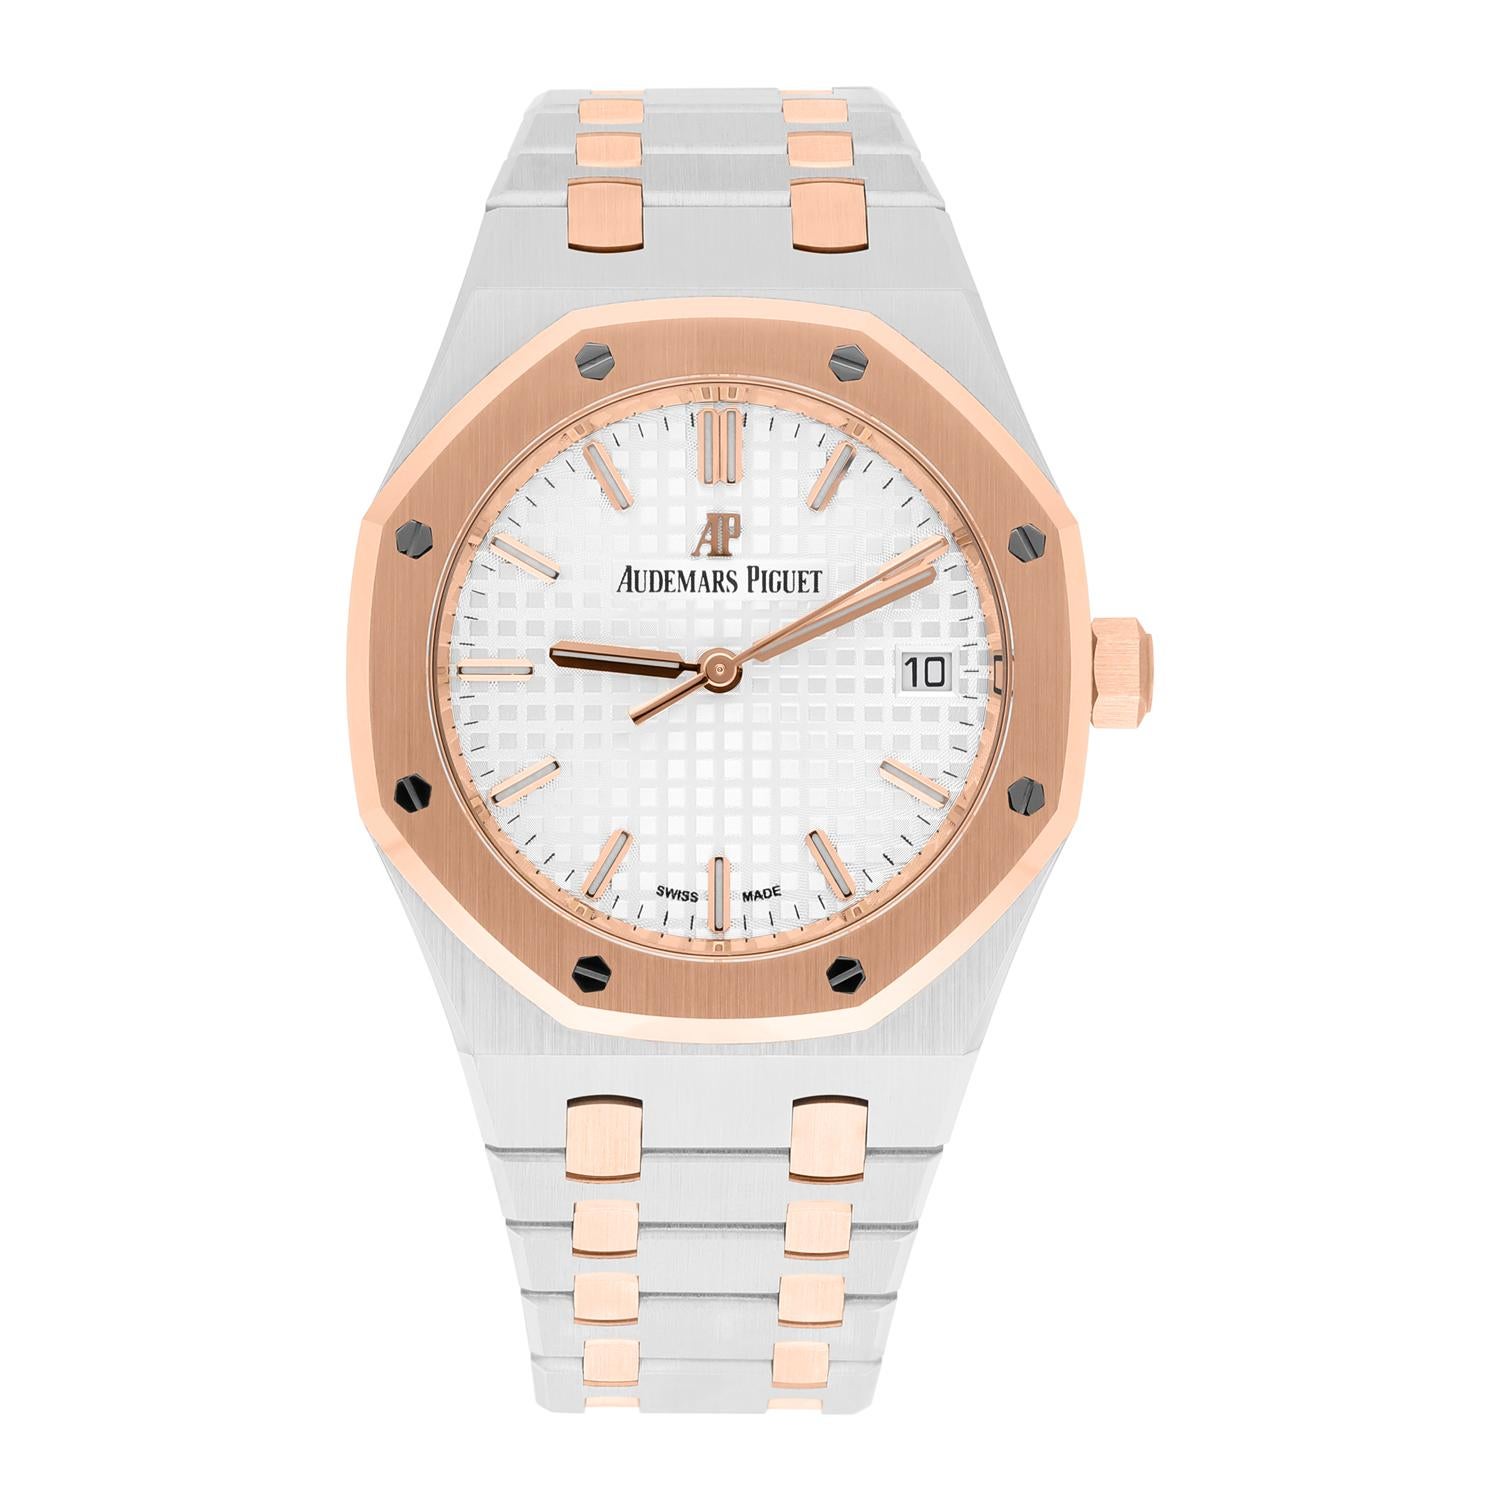 Truly NEW Audemars Piguet Royal Oak 34 2tone Stainless Steel and Rose Gold Women's Watch 77350SR.OO.1261SR.01 
Complete with original box and original papers.

Stainless steel case with a two-tone stainless steel and 18kt rose gold bracelet. Fixed